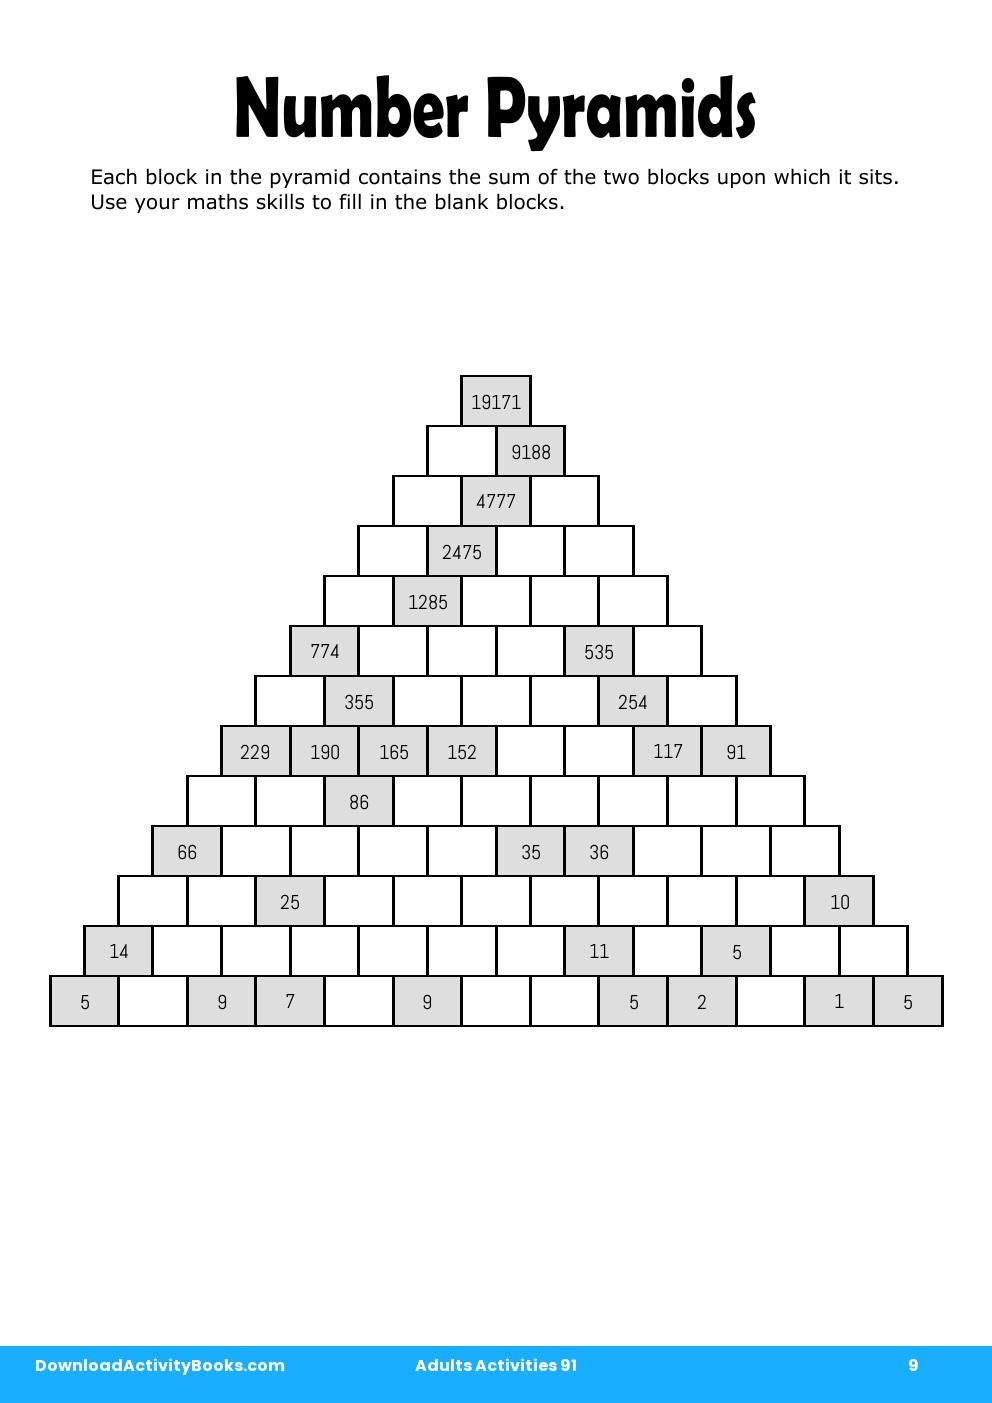 Number Pyramids in Adults Activities 91